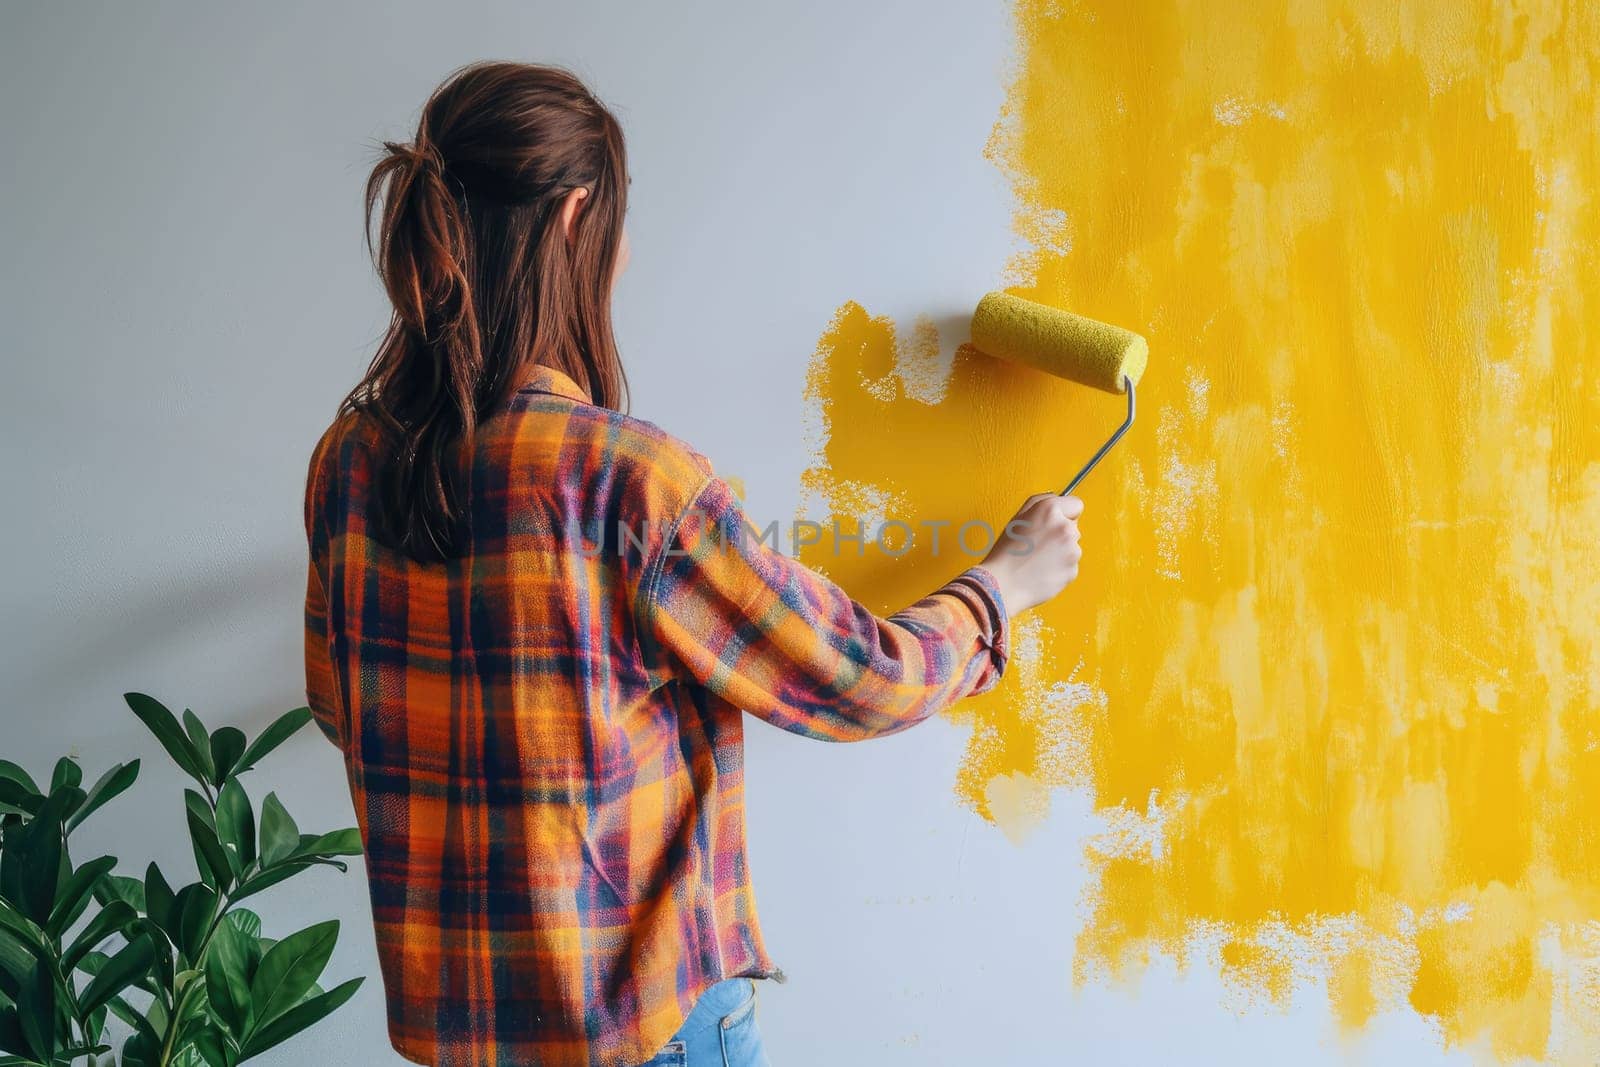 The girl gives the wall a bright yellow tint using a paint roller.